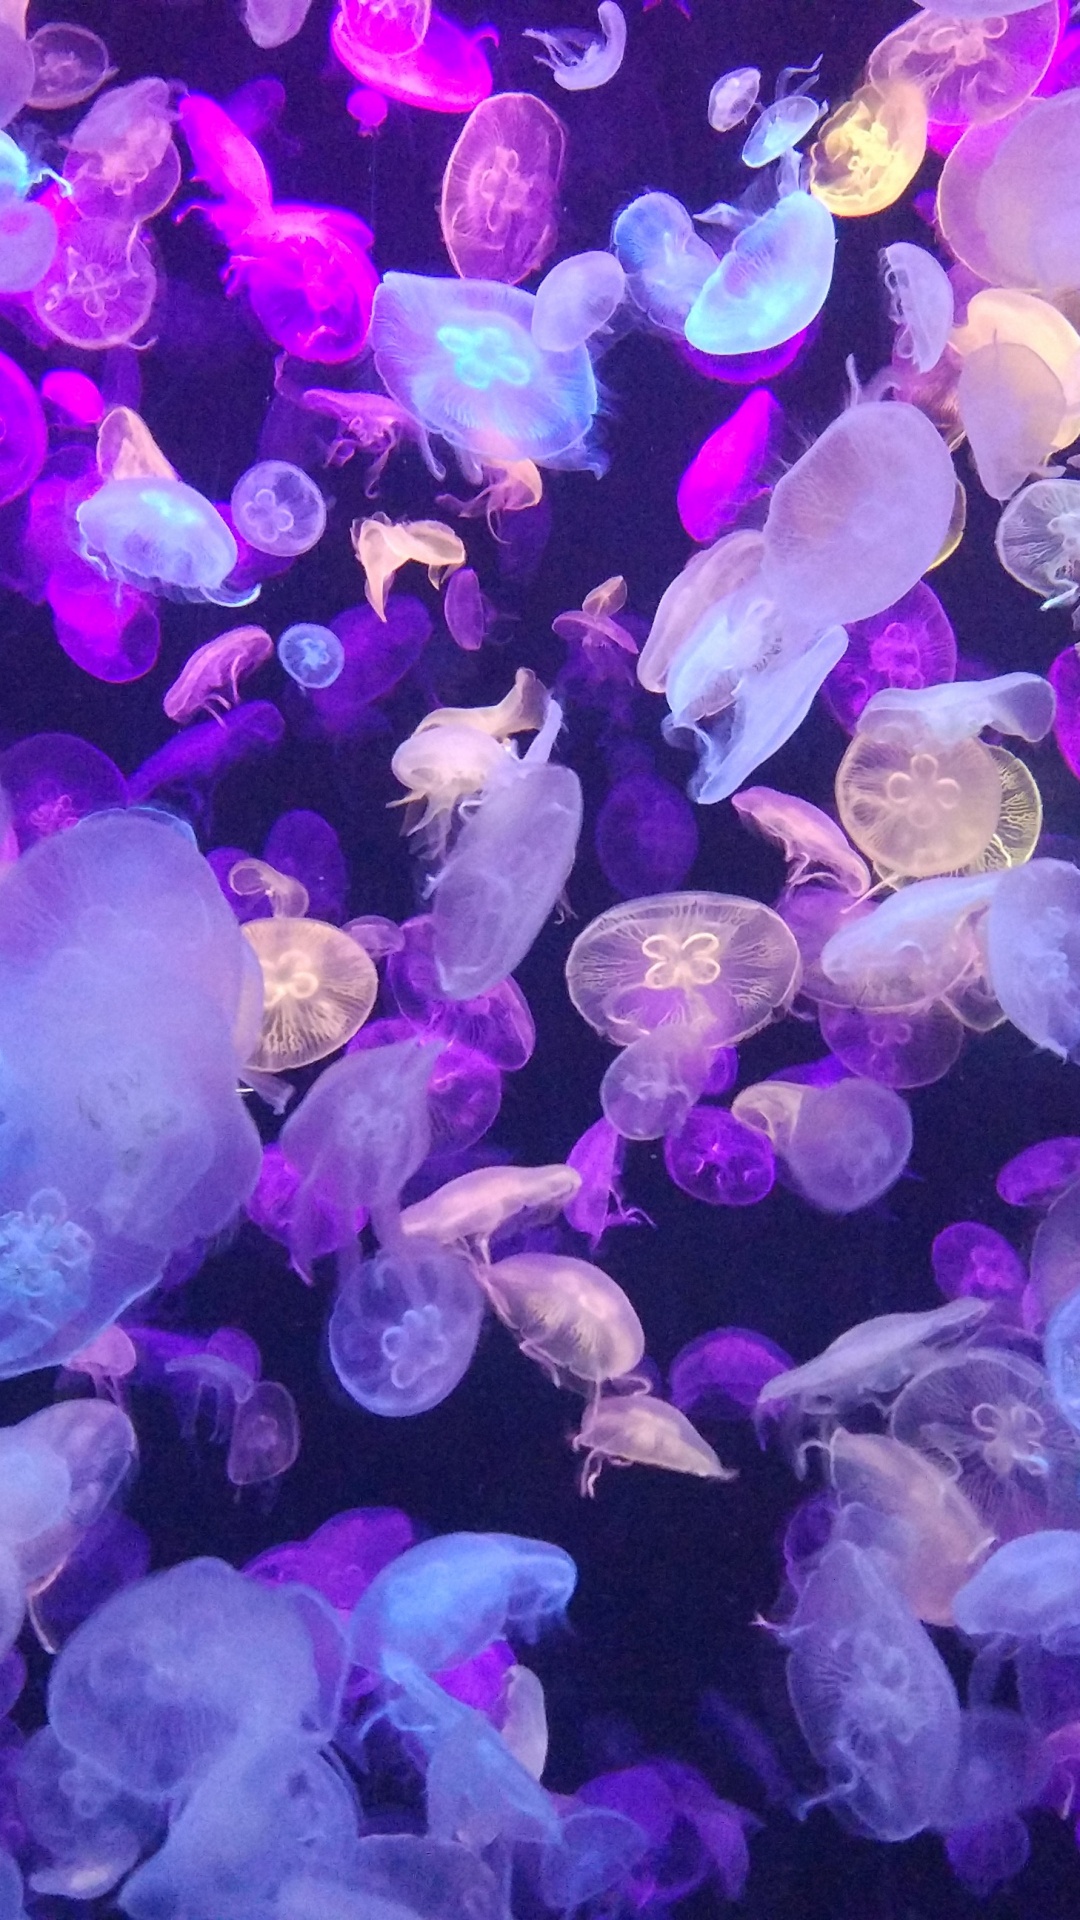 Purple and White Jelly Fish. Wallpaper in 1080x1920 Resolution